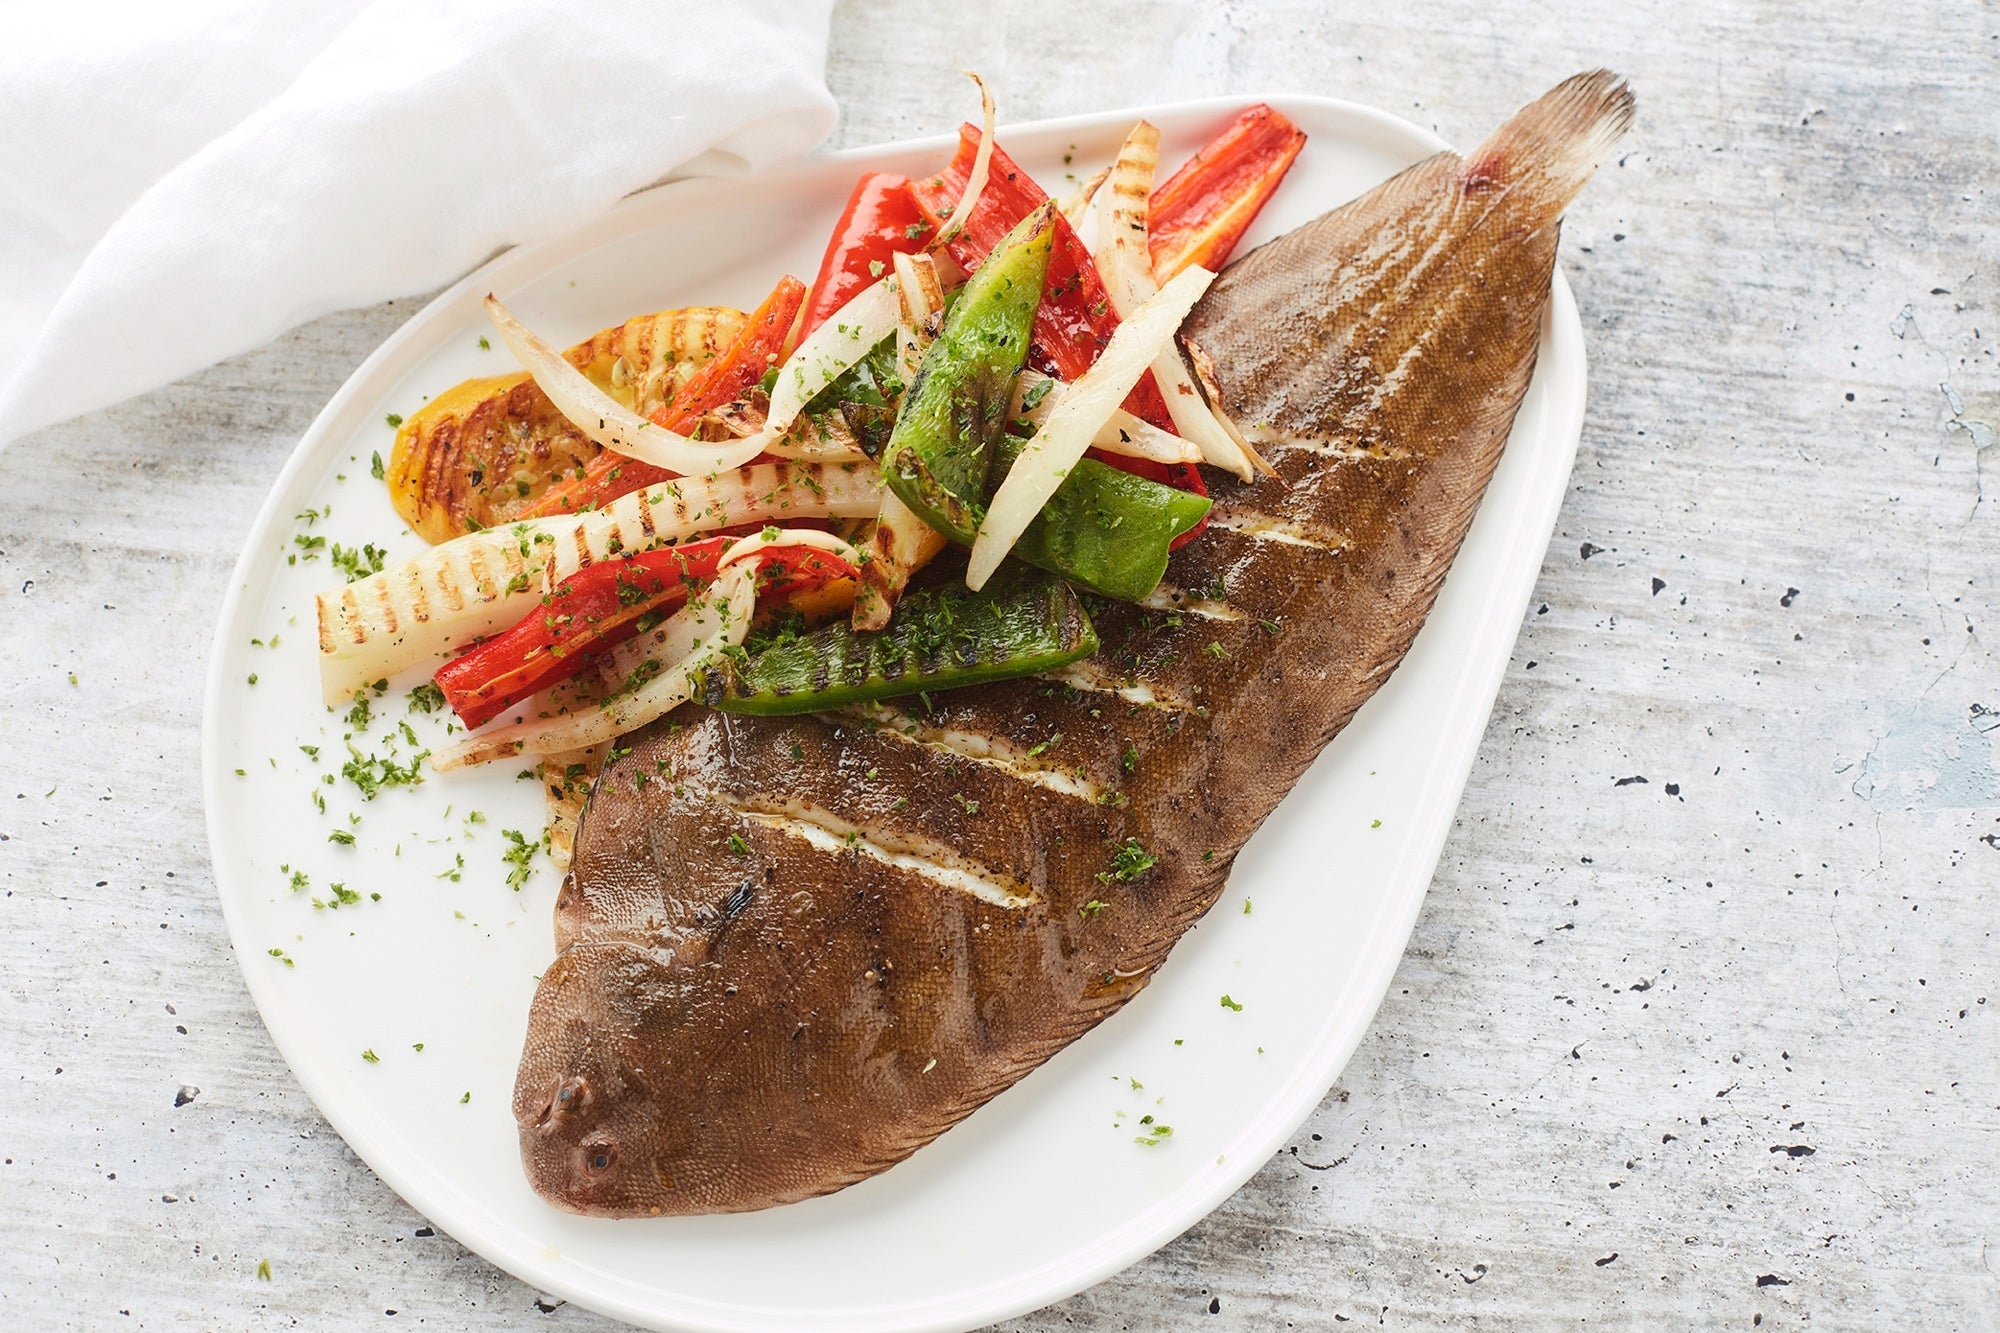 Grilled sole fillet with vegetables on the BBQ